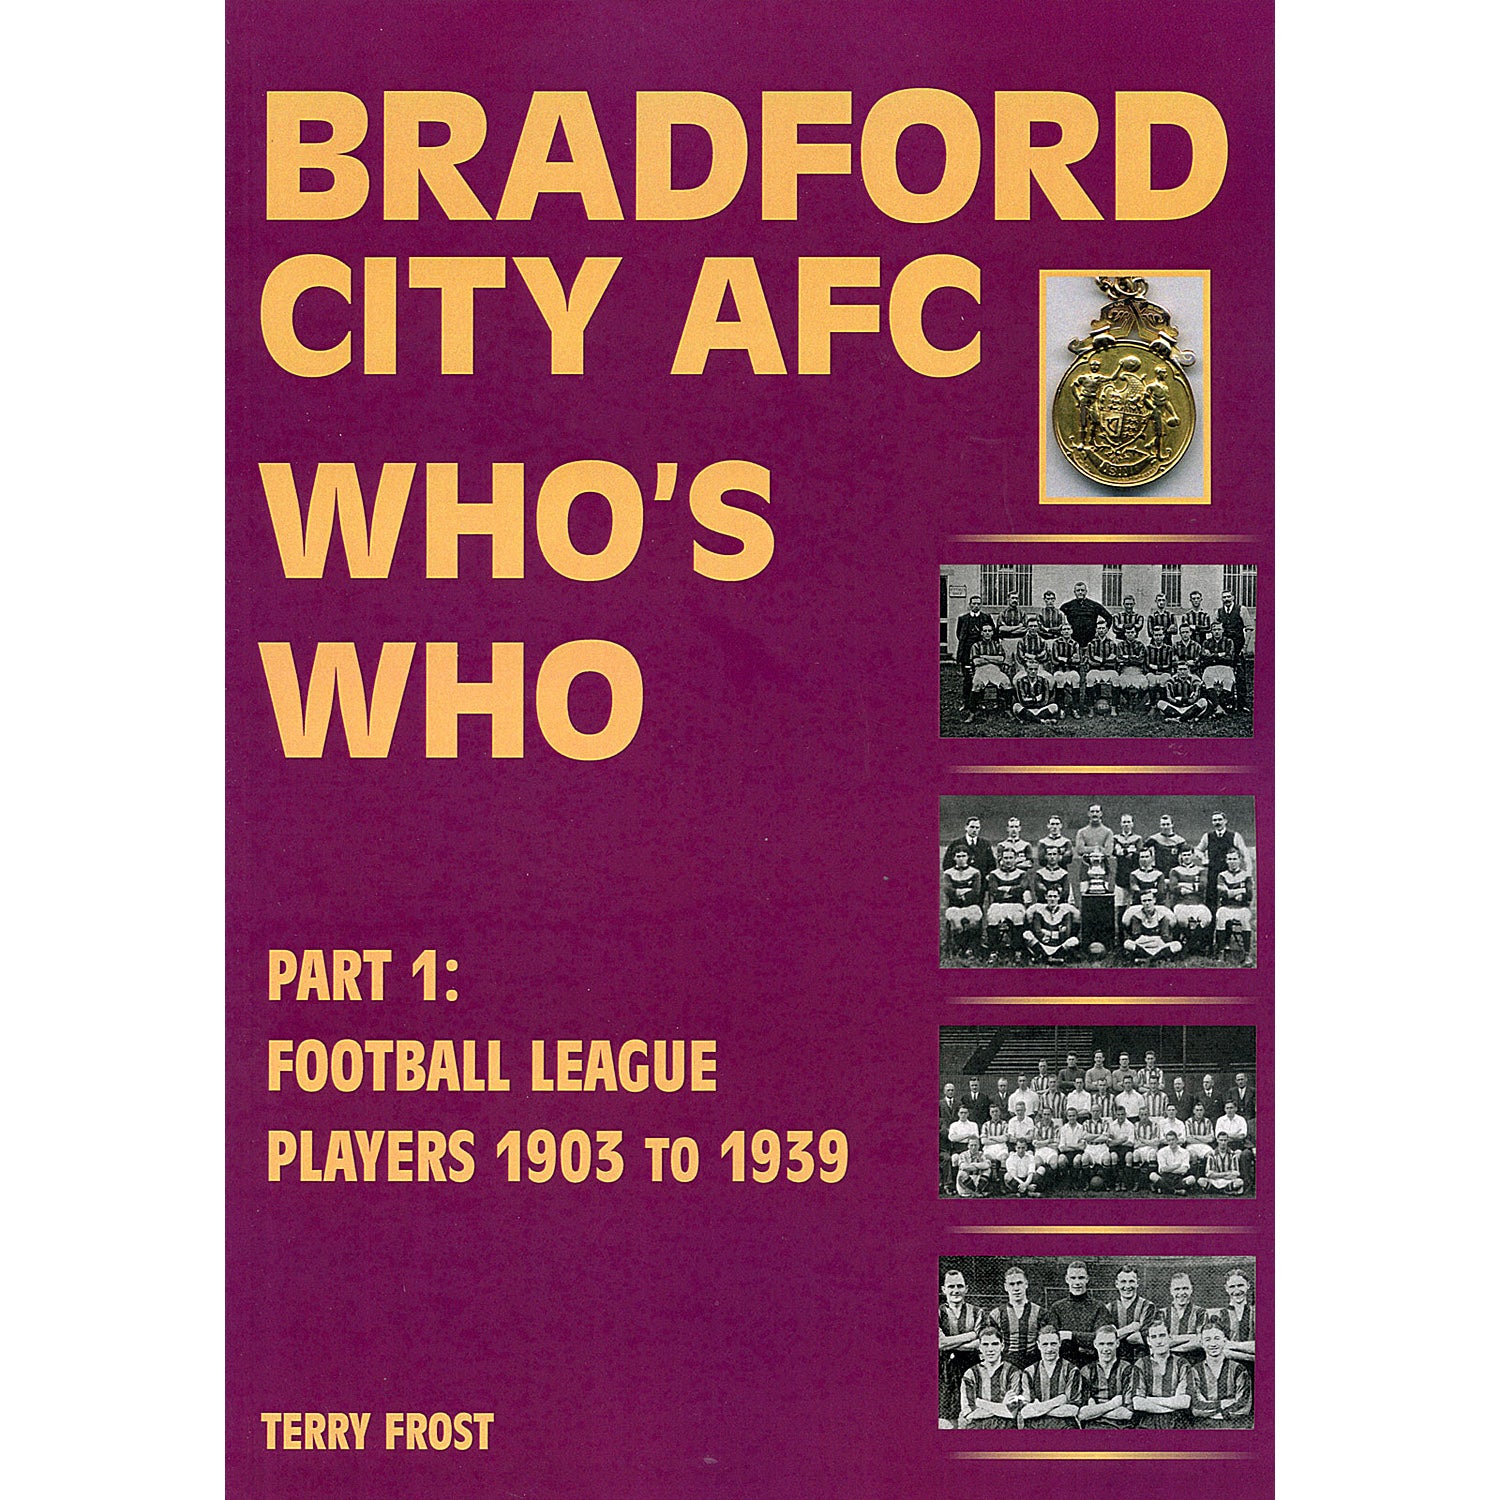 Bradford City AFC Who's Who – Part 1: Football League Players 1903 to 1939